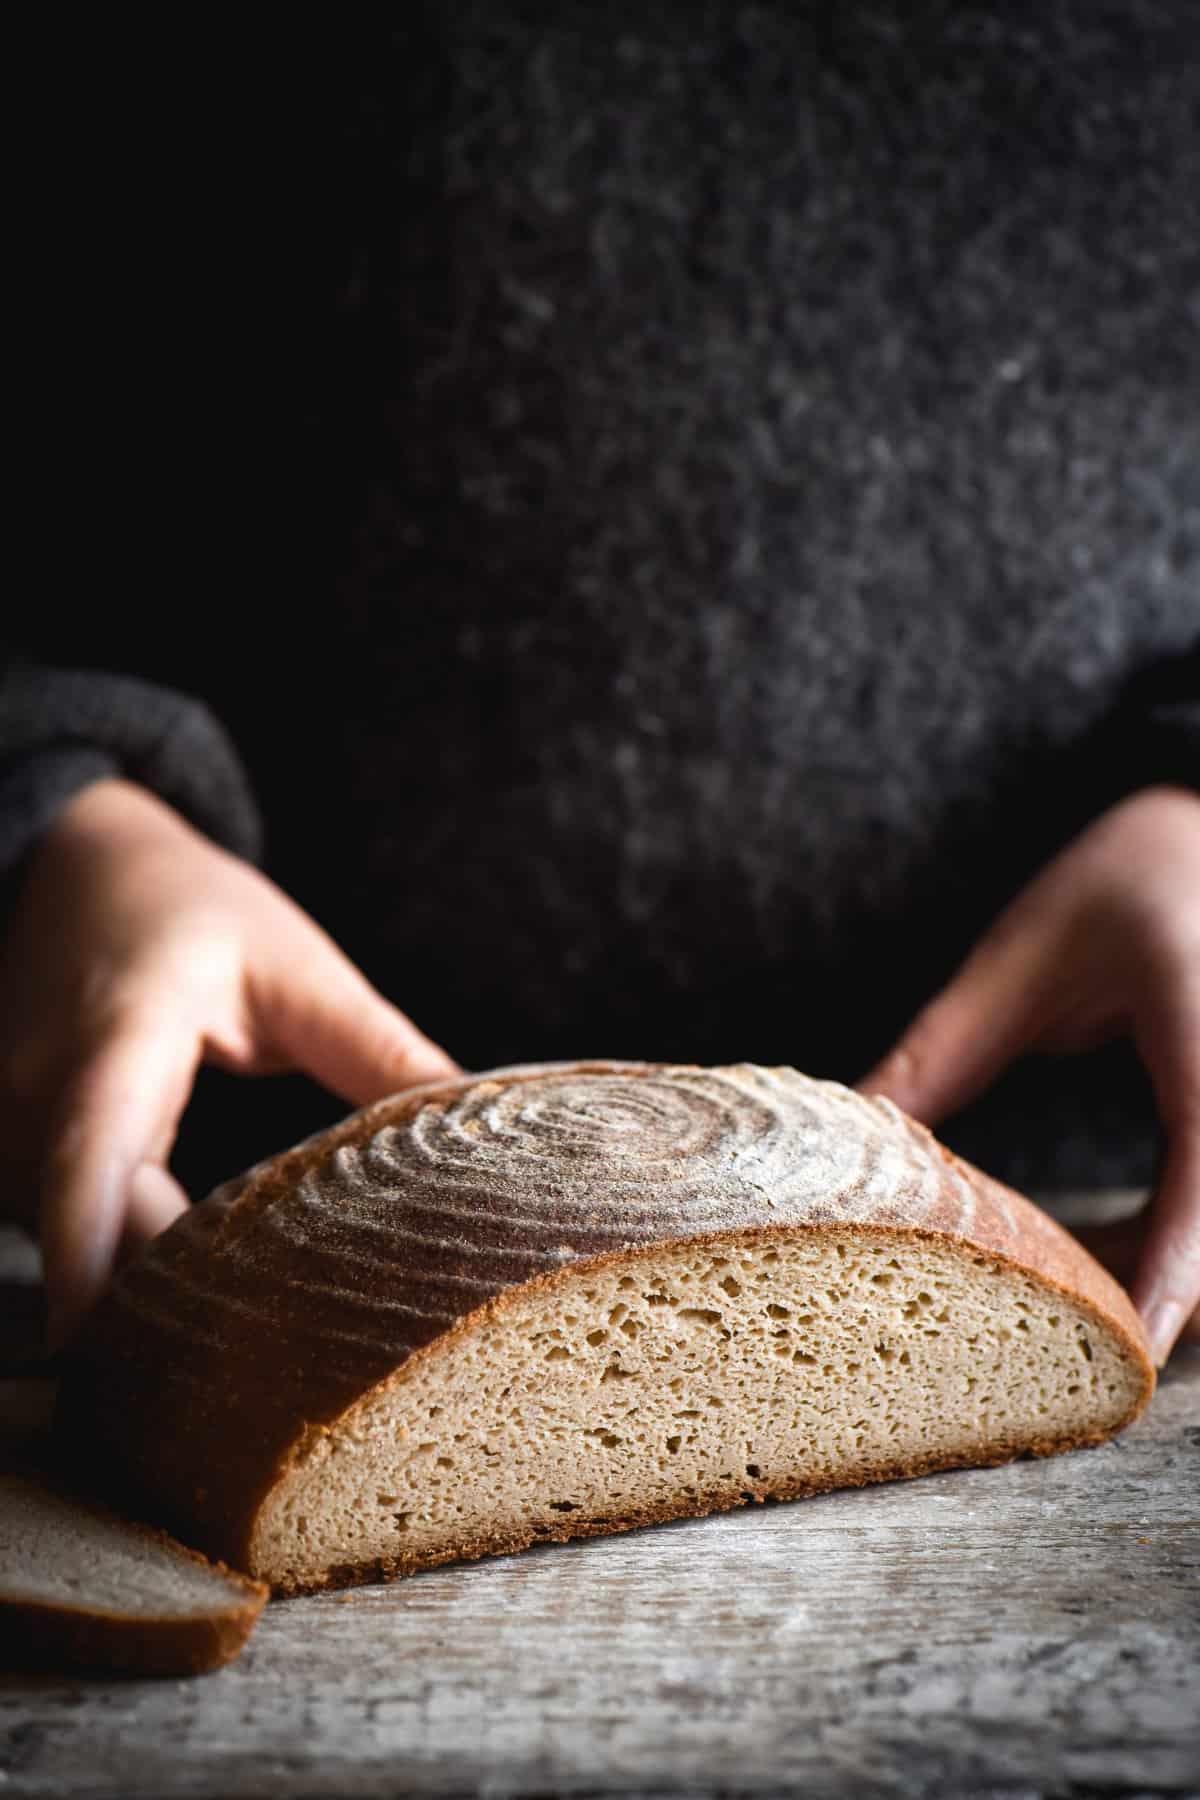 A sliced boule of gluten free sourdough sits on a white wooden backdrop. A person stands behind the loaf wearing a grey woollen jumper, and two hands extends out to hold the loaf on either side.